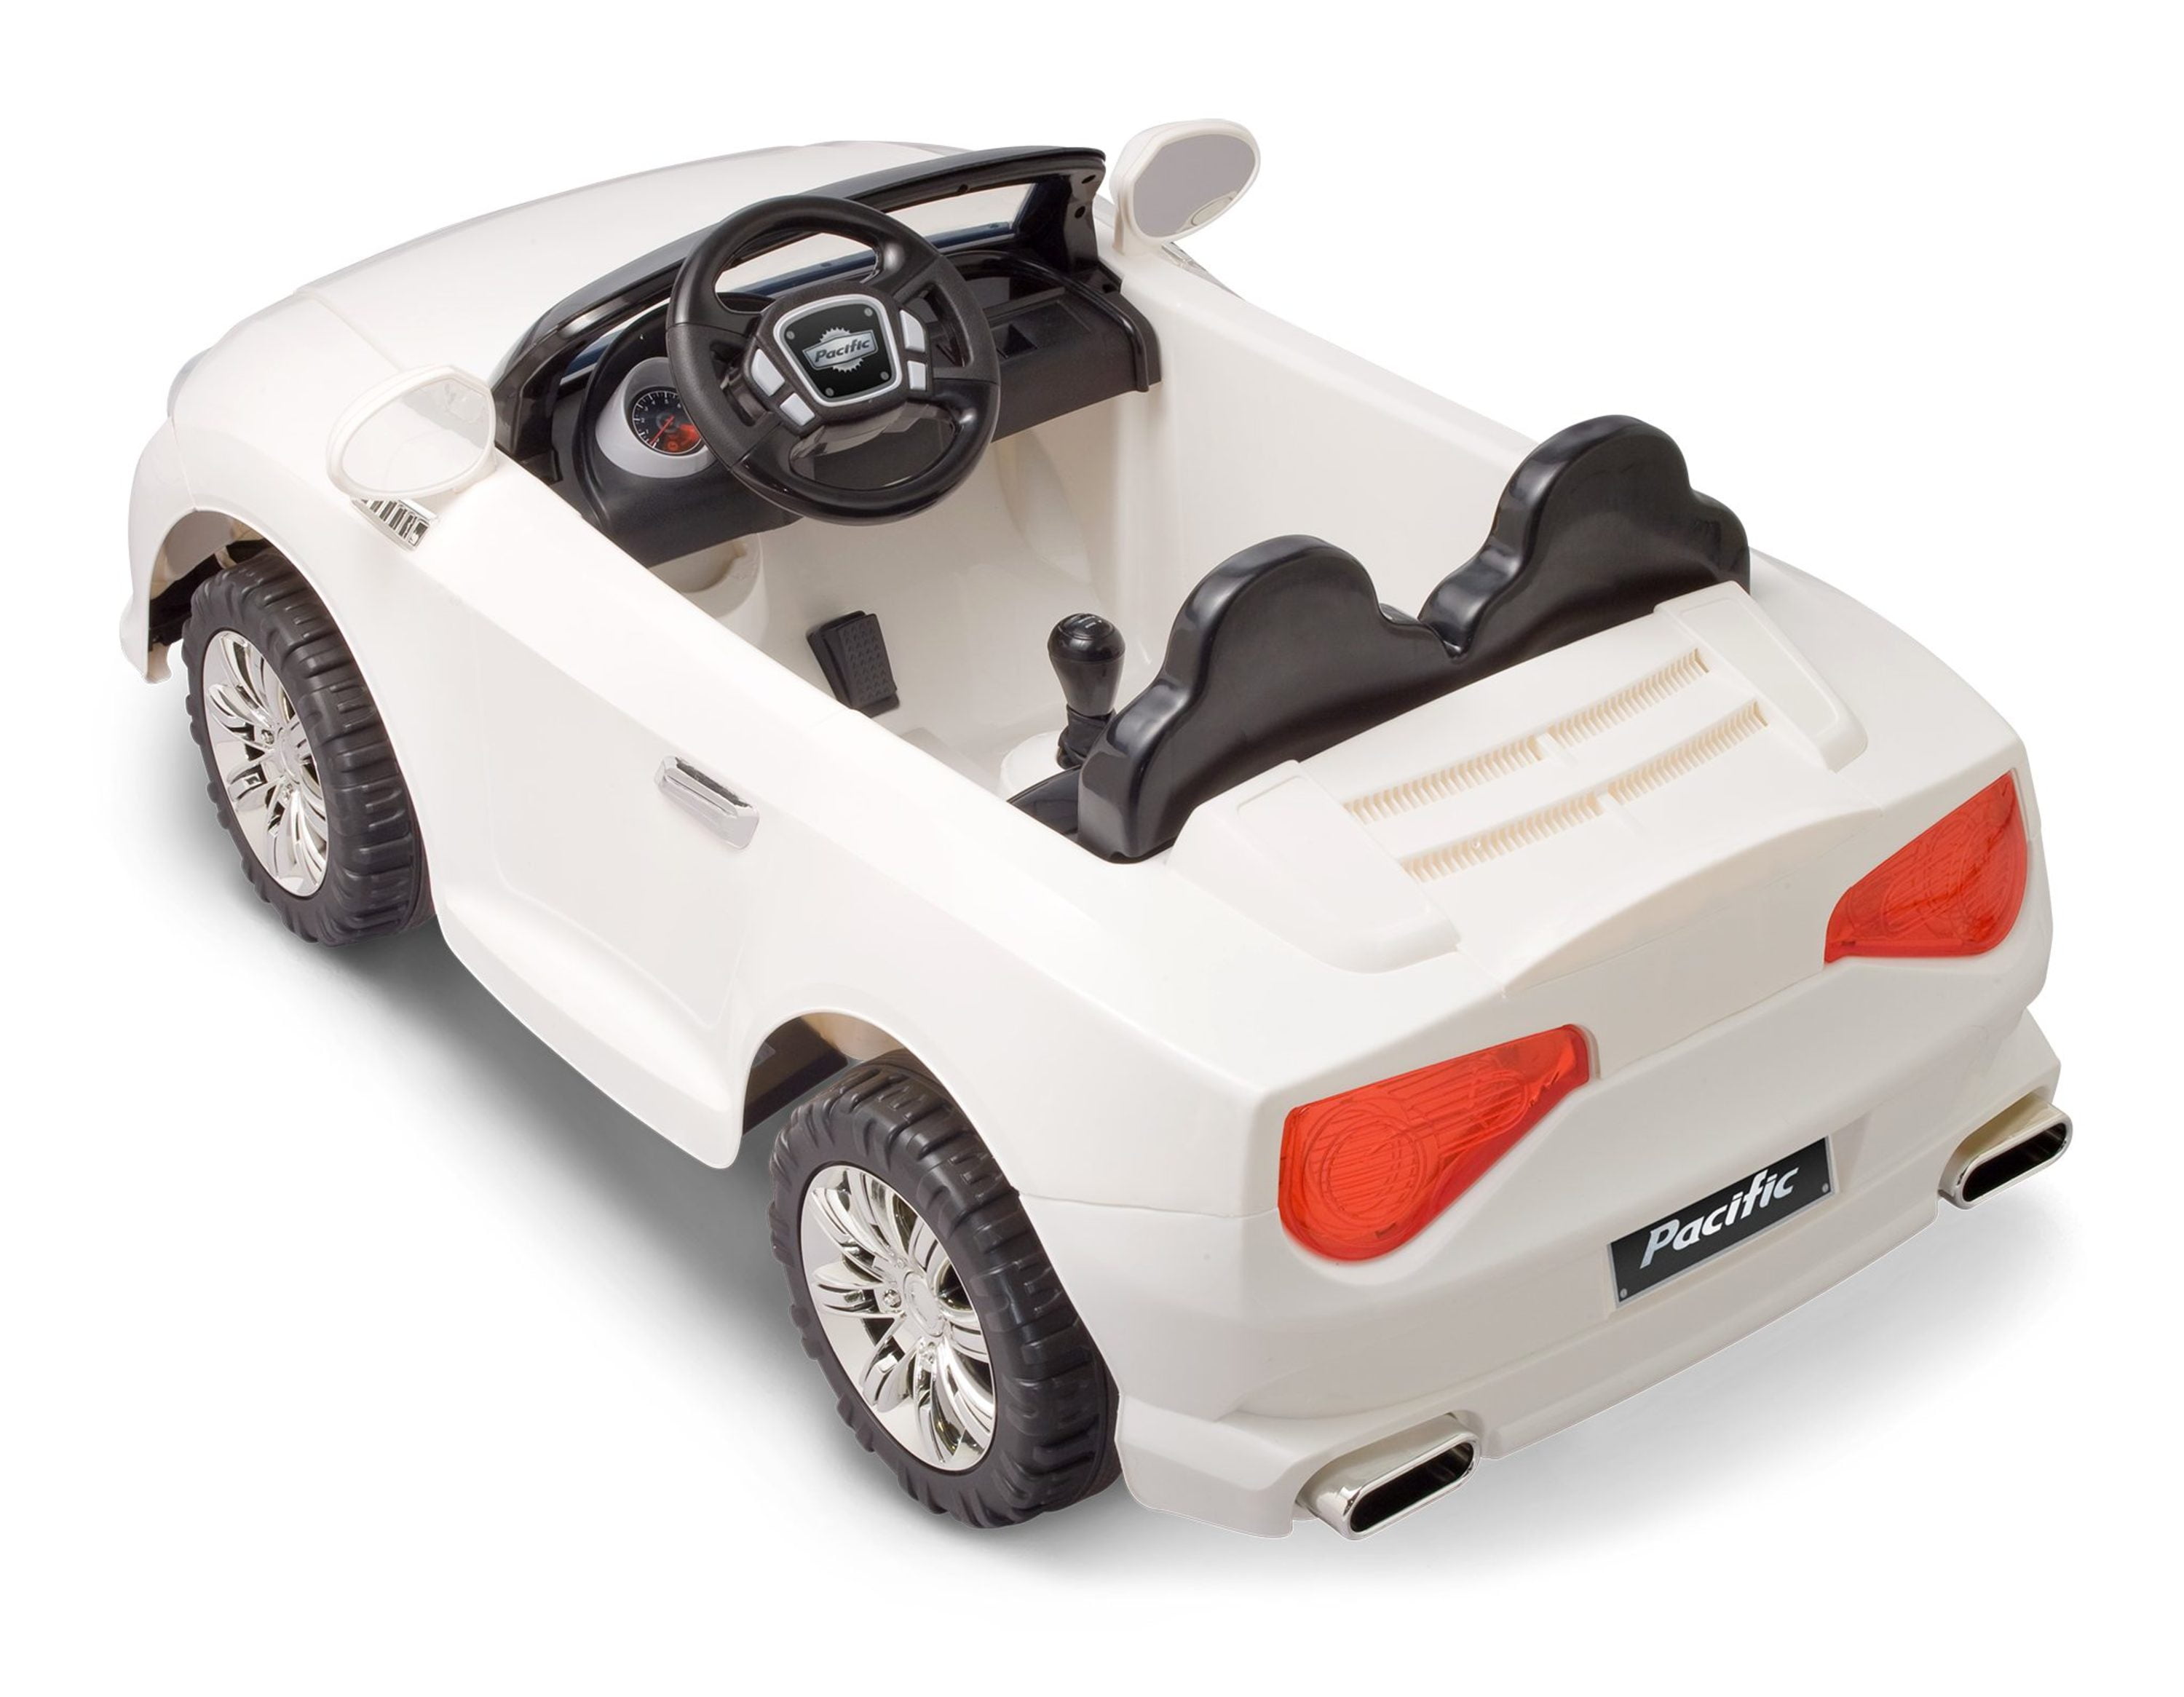 pacific cycle convertible sports car 12v battery